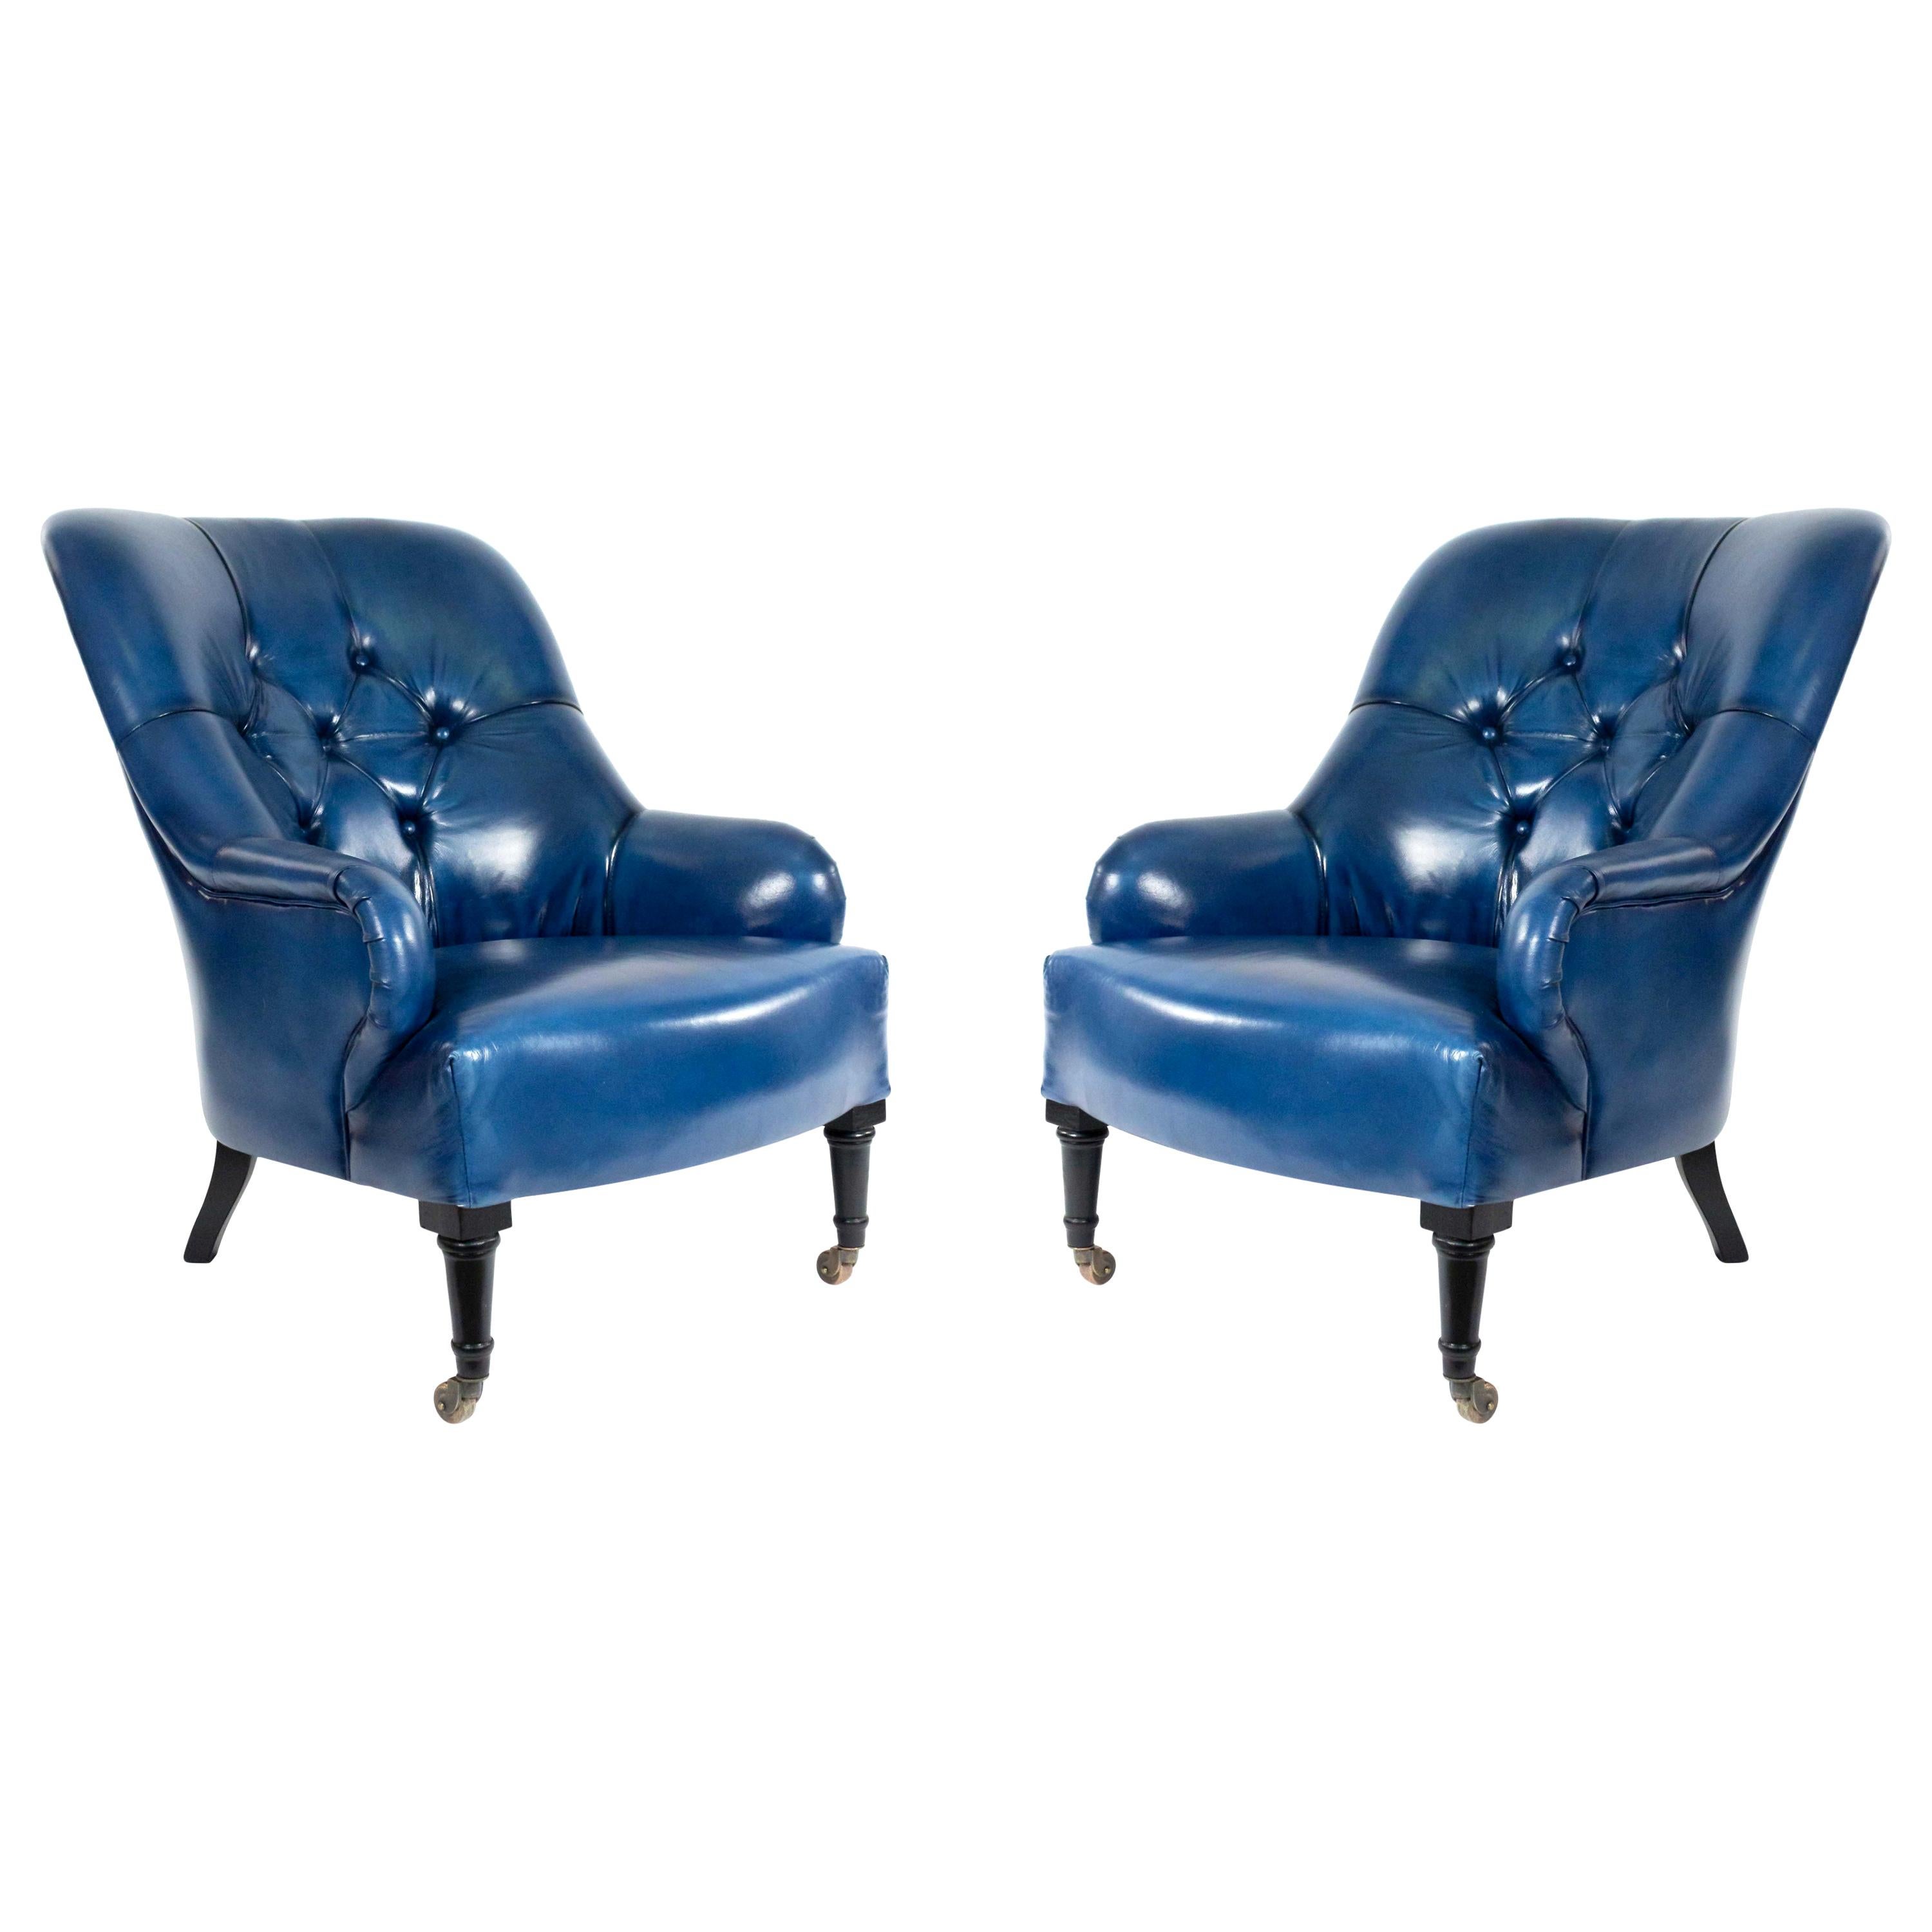 English Victorian Style Blue Tufted Leather Arm / Club Chairs '3 Pairs' For Sale